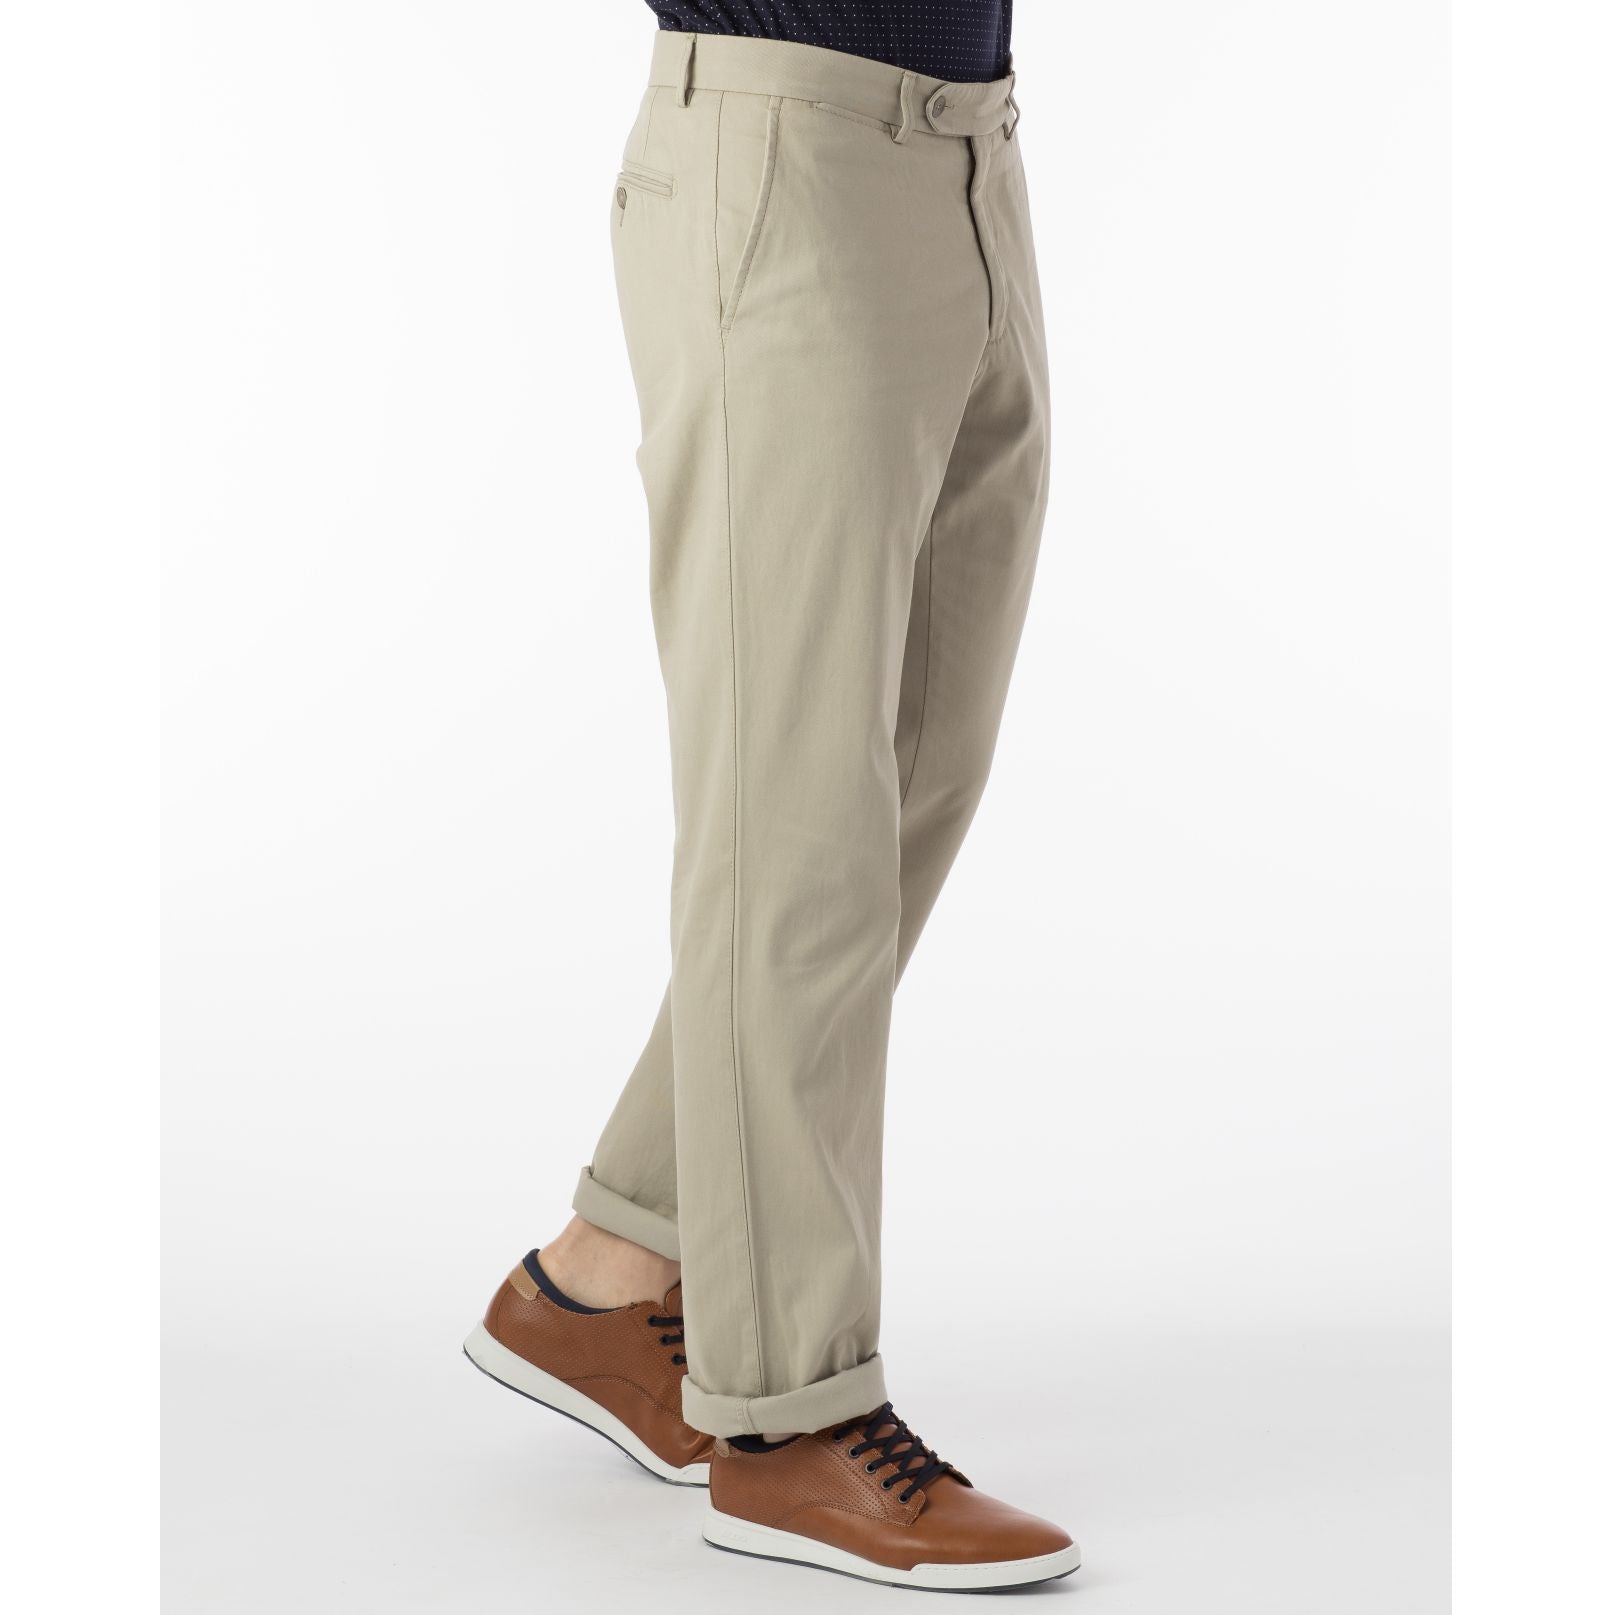 Perma Color Pima Twill Khaki Pants in Stone (Flat Front Models) by Ballin